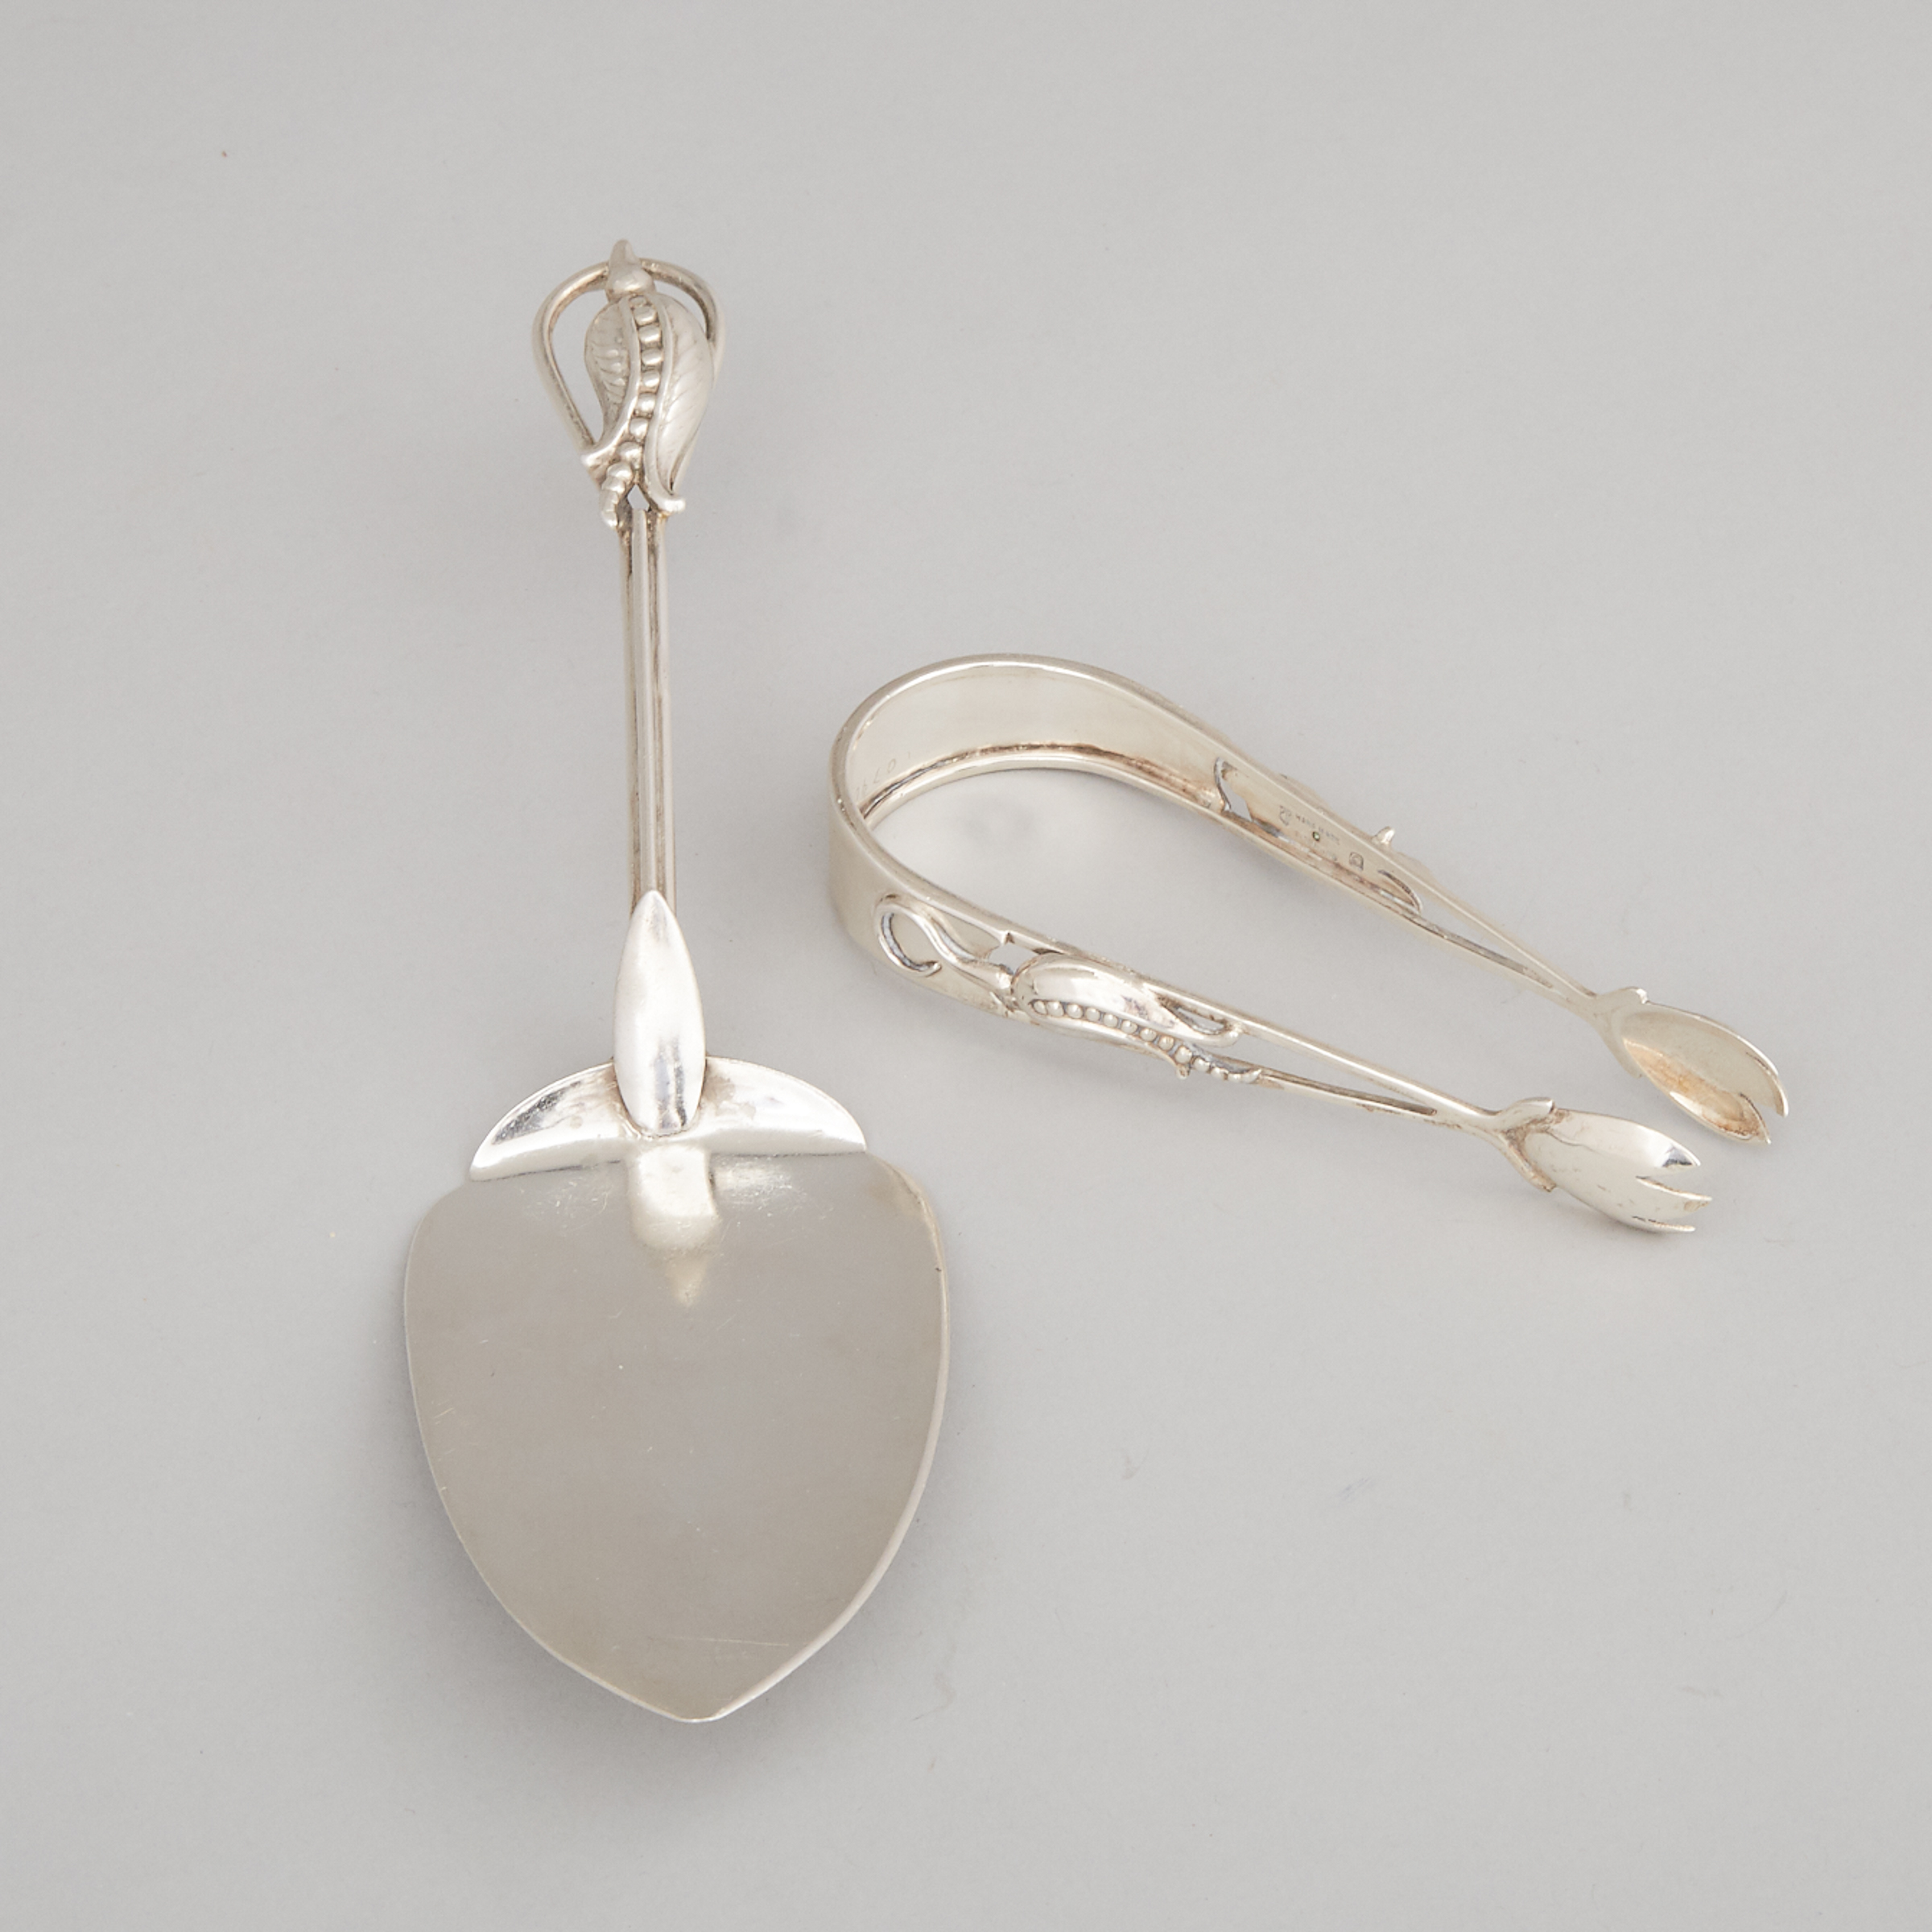 Canadian Silver Pie Server and Sugar Tongs, Carl Poul Petersen, Montreal, Que., mid-20th century